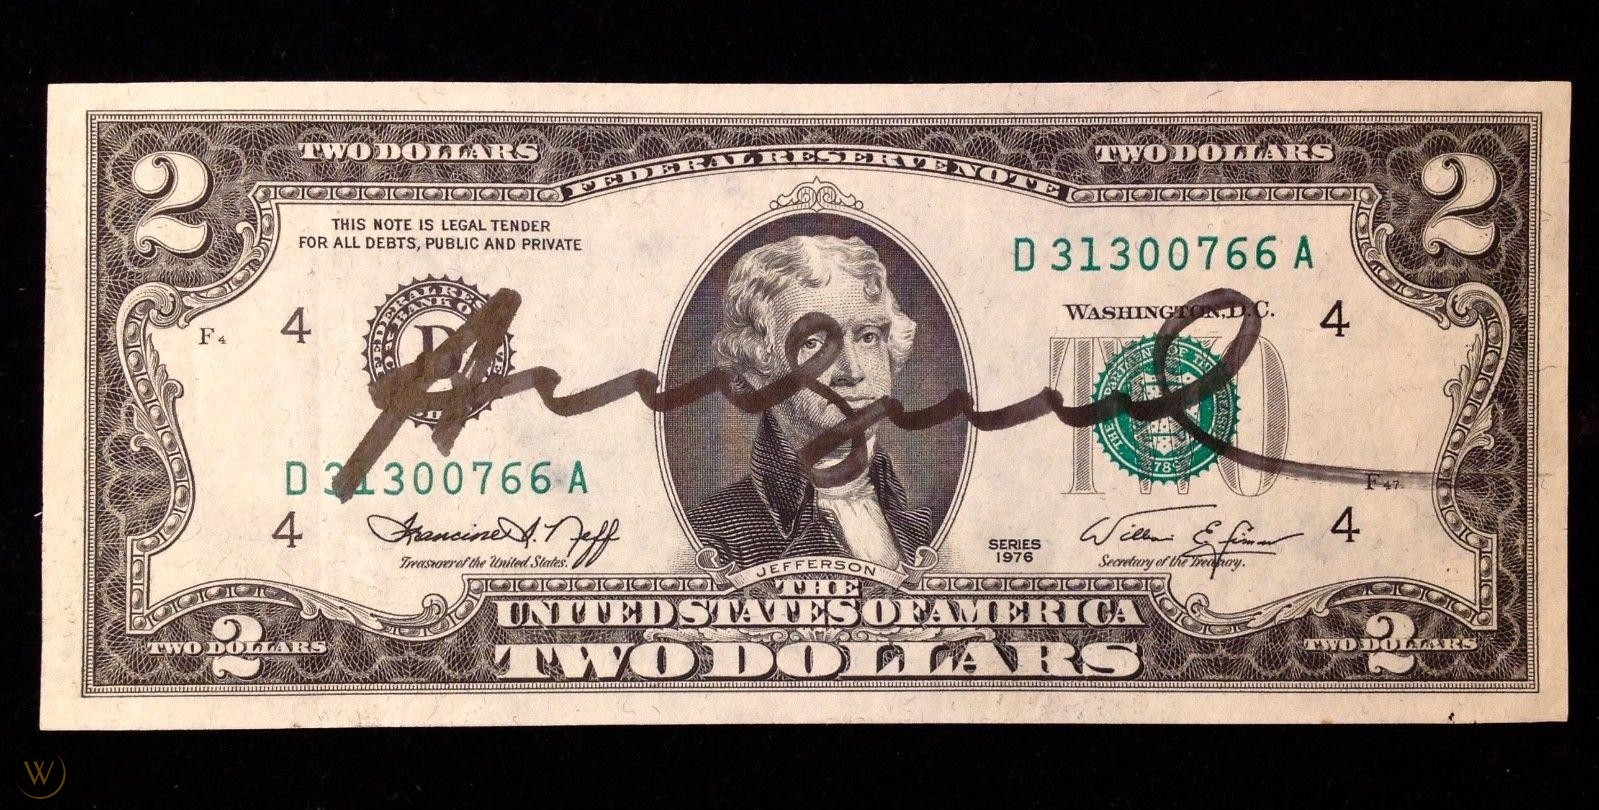 an American bill signed by Andy Warhol